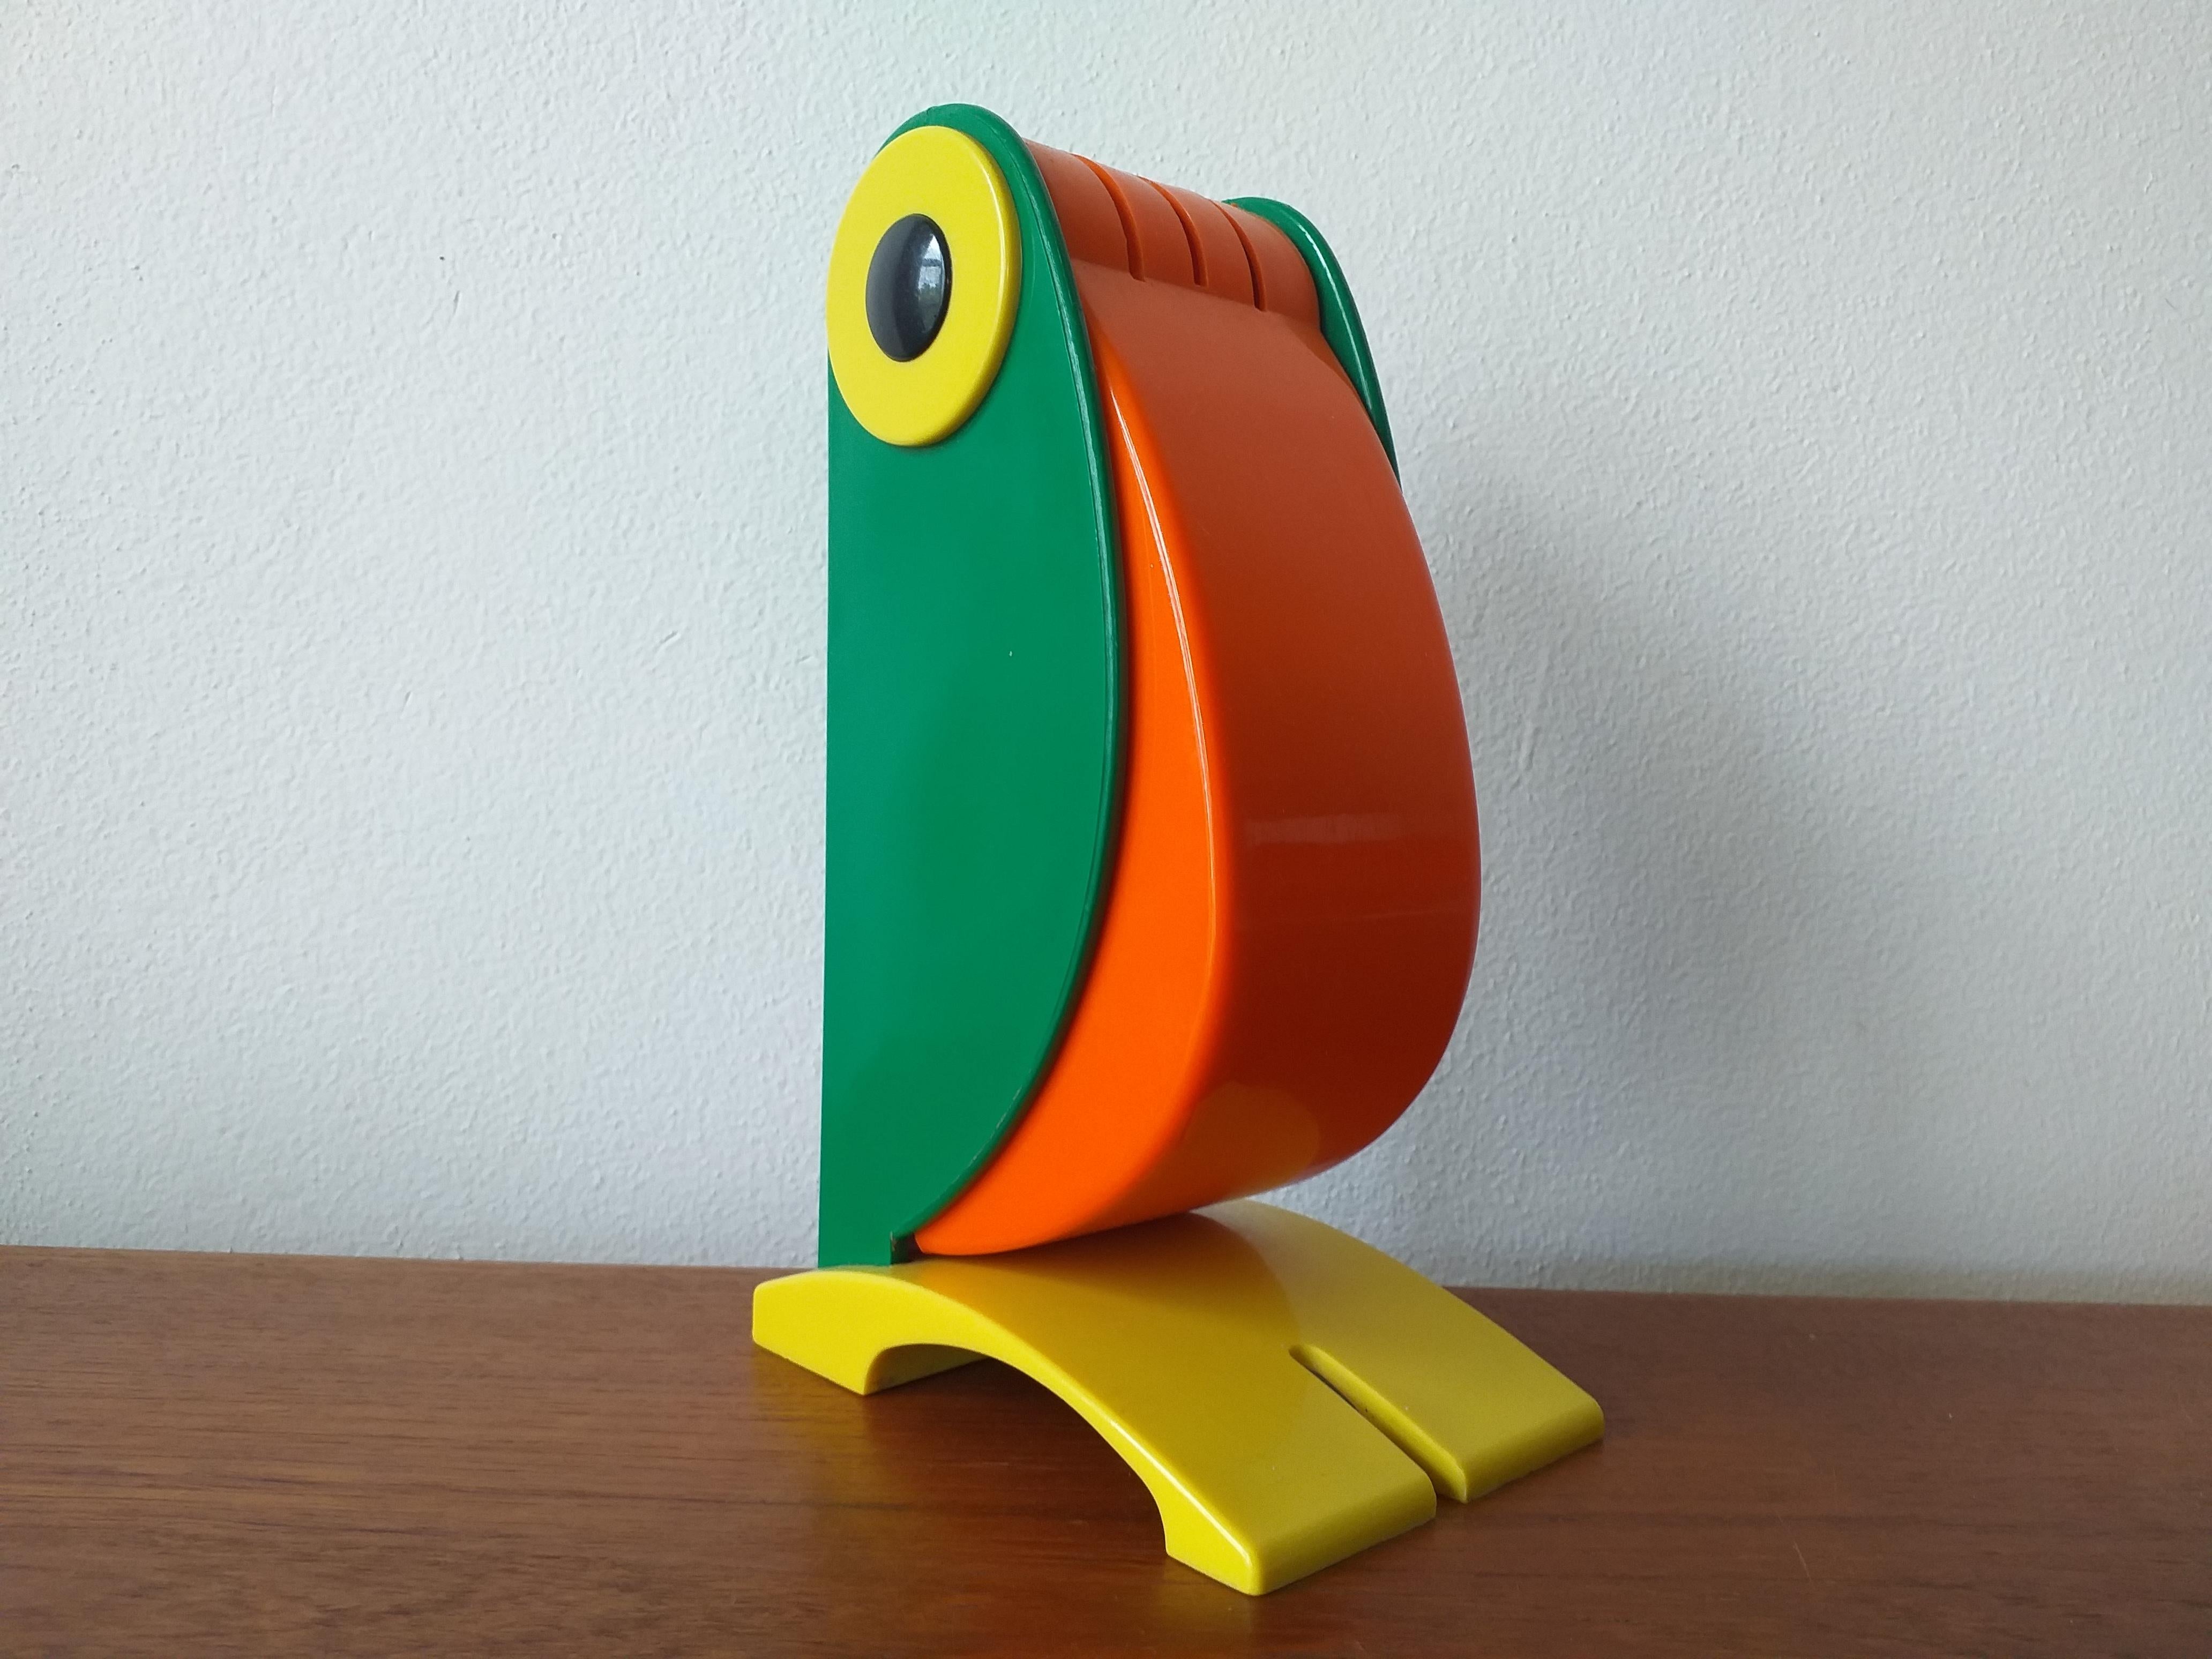 - Rare colored
- Iconic type of lamp
- OTF /Old Timer Ferrari/ Verona
- Toucan or parrot.